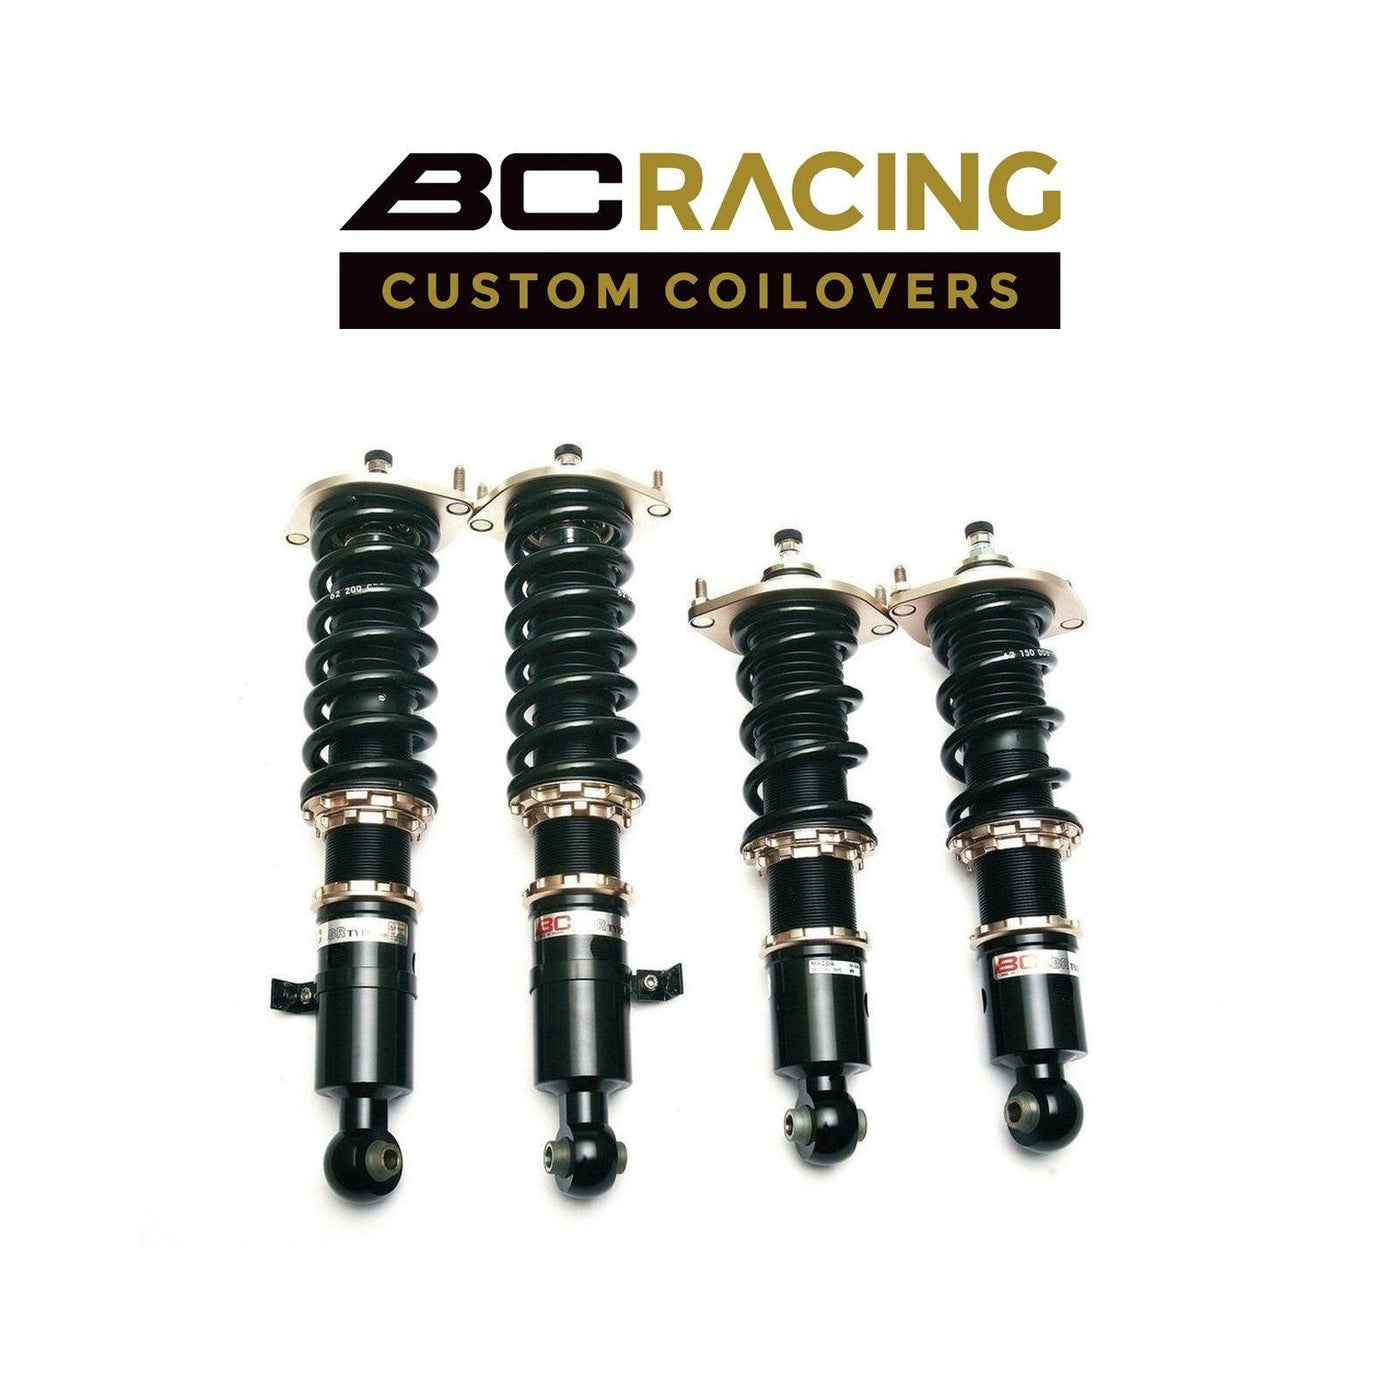 BC Racing Coilovers 2008-2013 PORSCHE Cayman I/II Gen/2005-2007 Boxter 987 - Attacking the Clock Racing